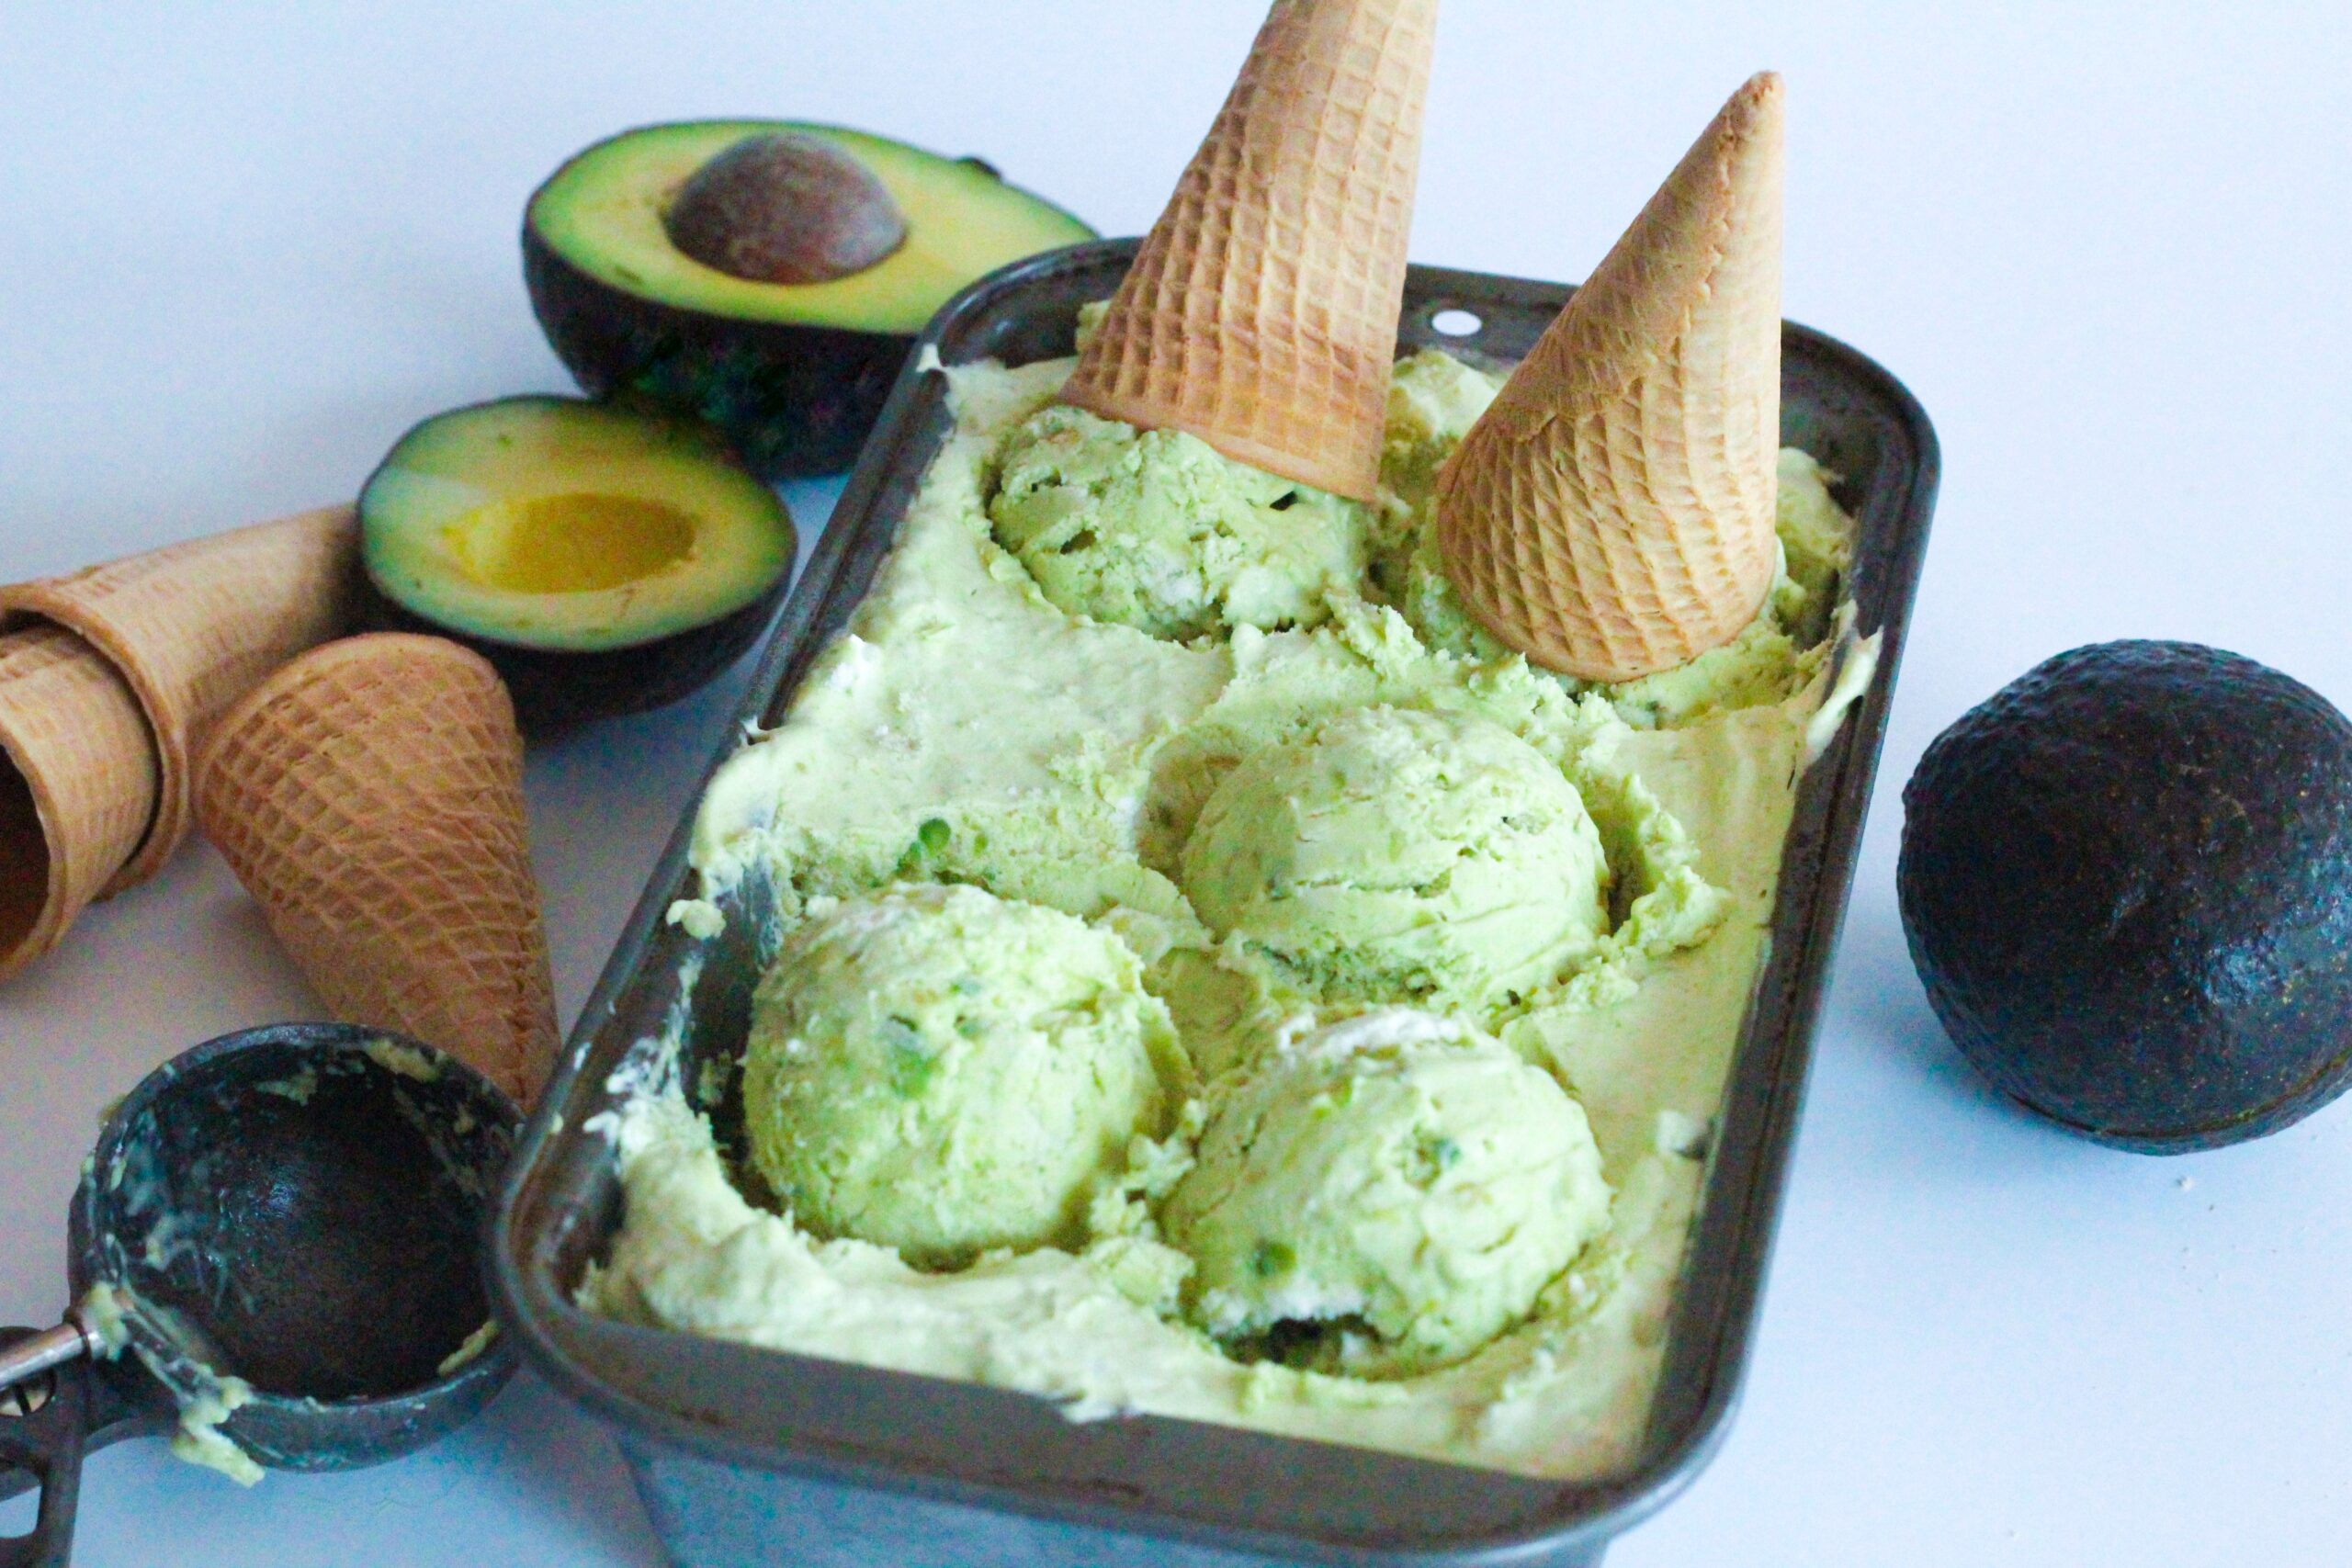 Angled view of the loaf pan of avocado ice cream with three scoops sitting in the pan, and two more with ice cream cones on them also still sitting in the pan. to the right of the pan is a whole avocado. To the left of the pan, on the upper side of the frame is two halves of an avocado, in front of them are three ice cream cones, two stacked inside of eachother, and in front of those is an ice cream scooper.